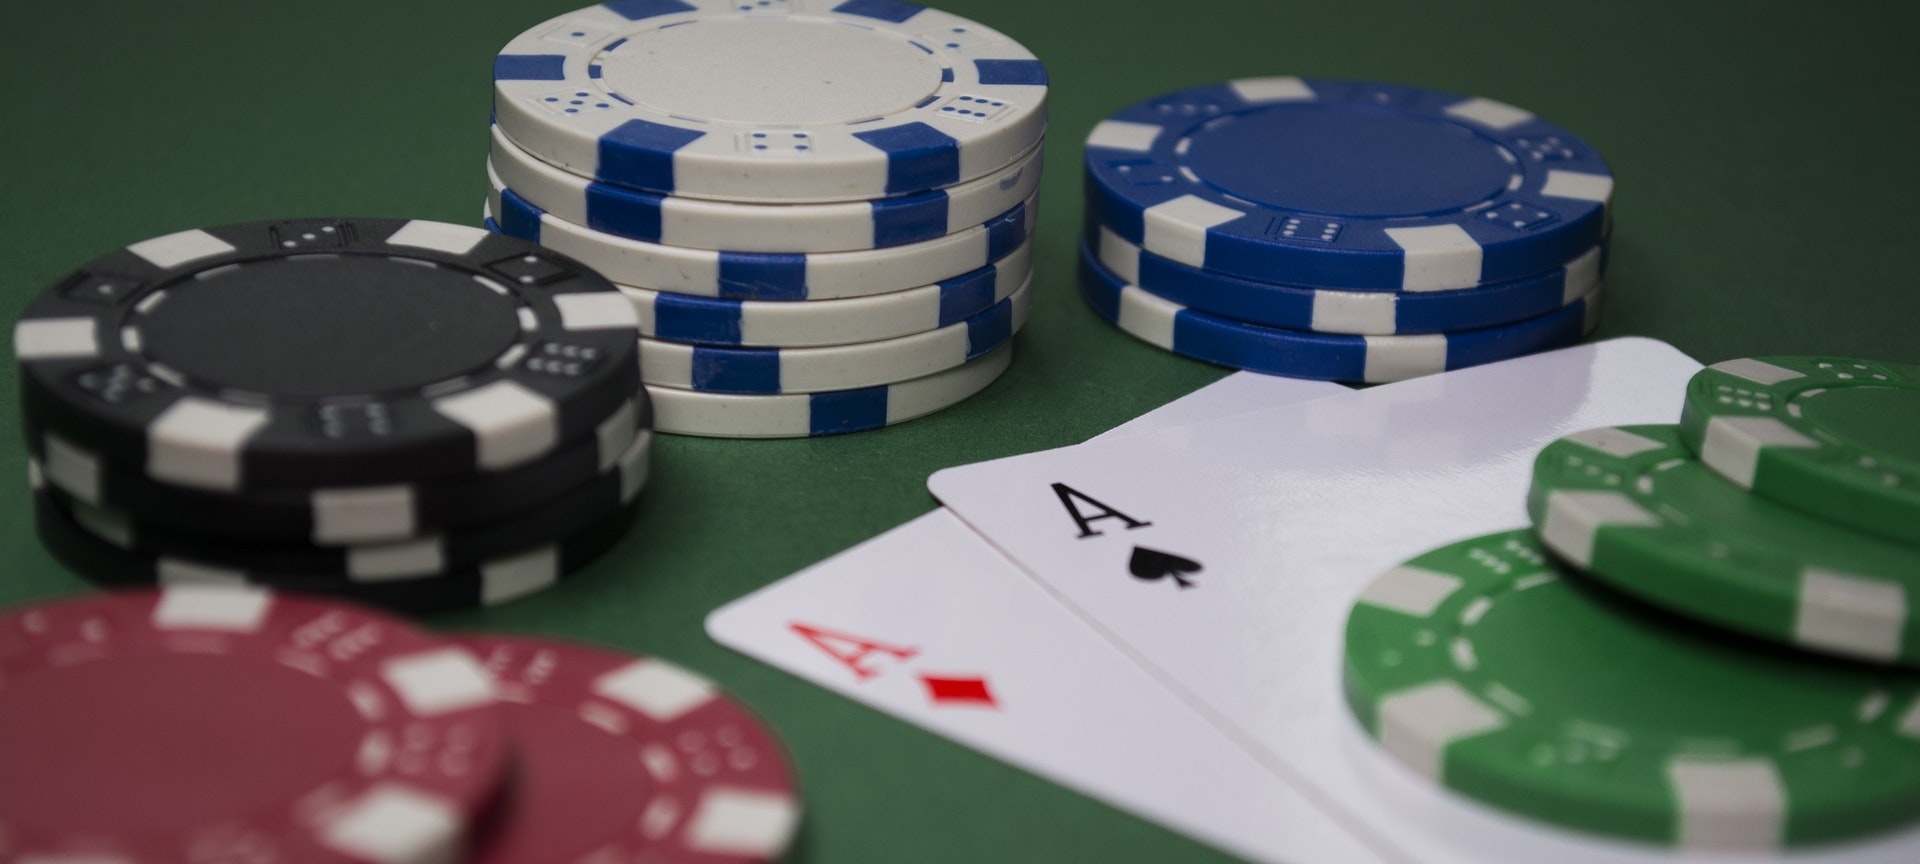 Getting the upper hand: Knowing when to bluff in poker